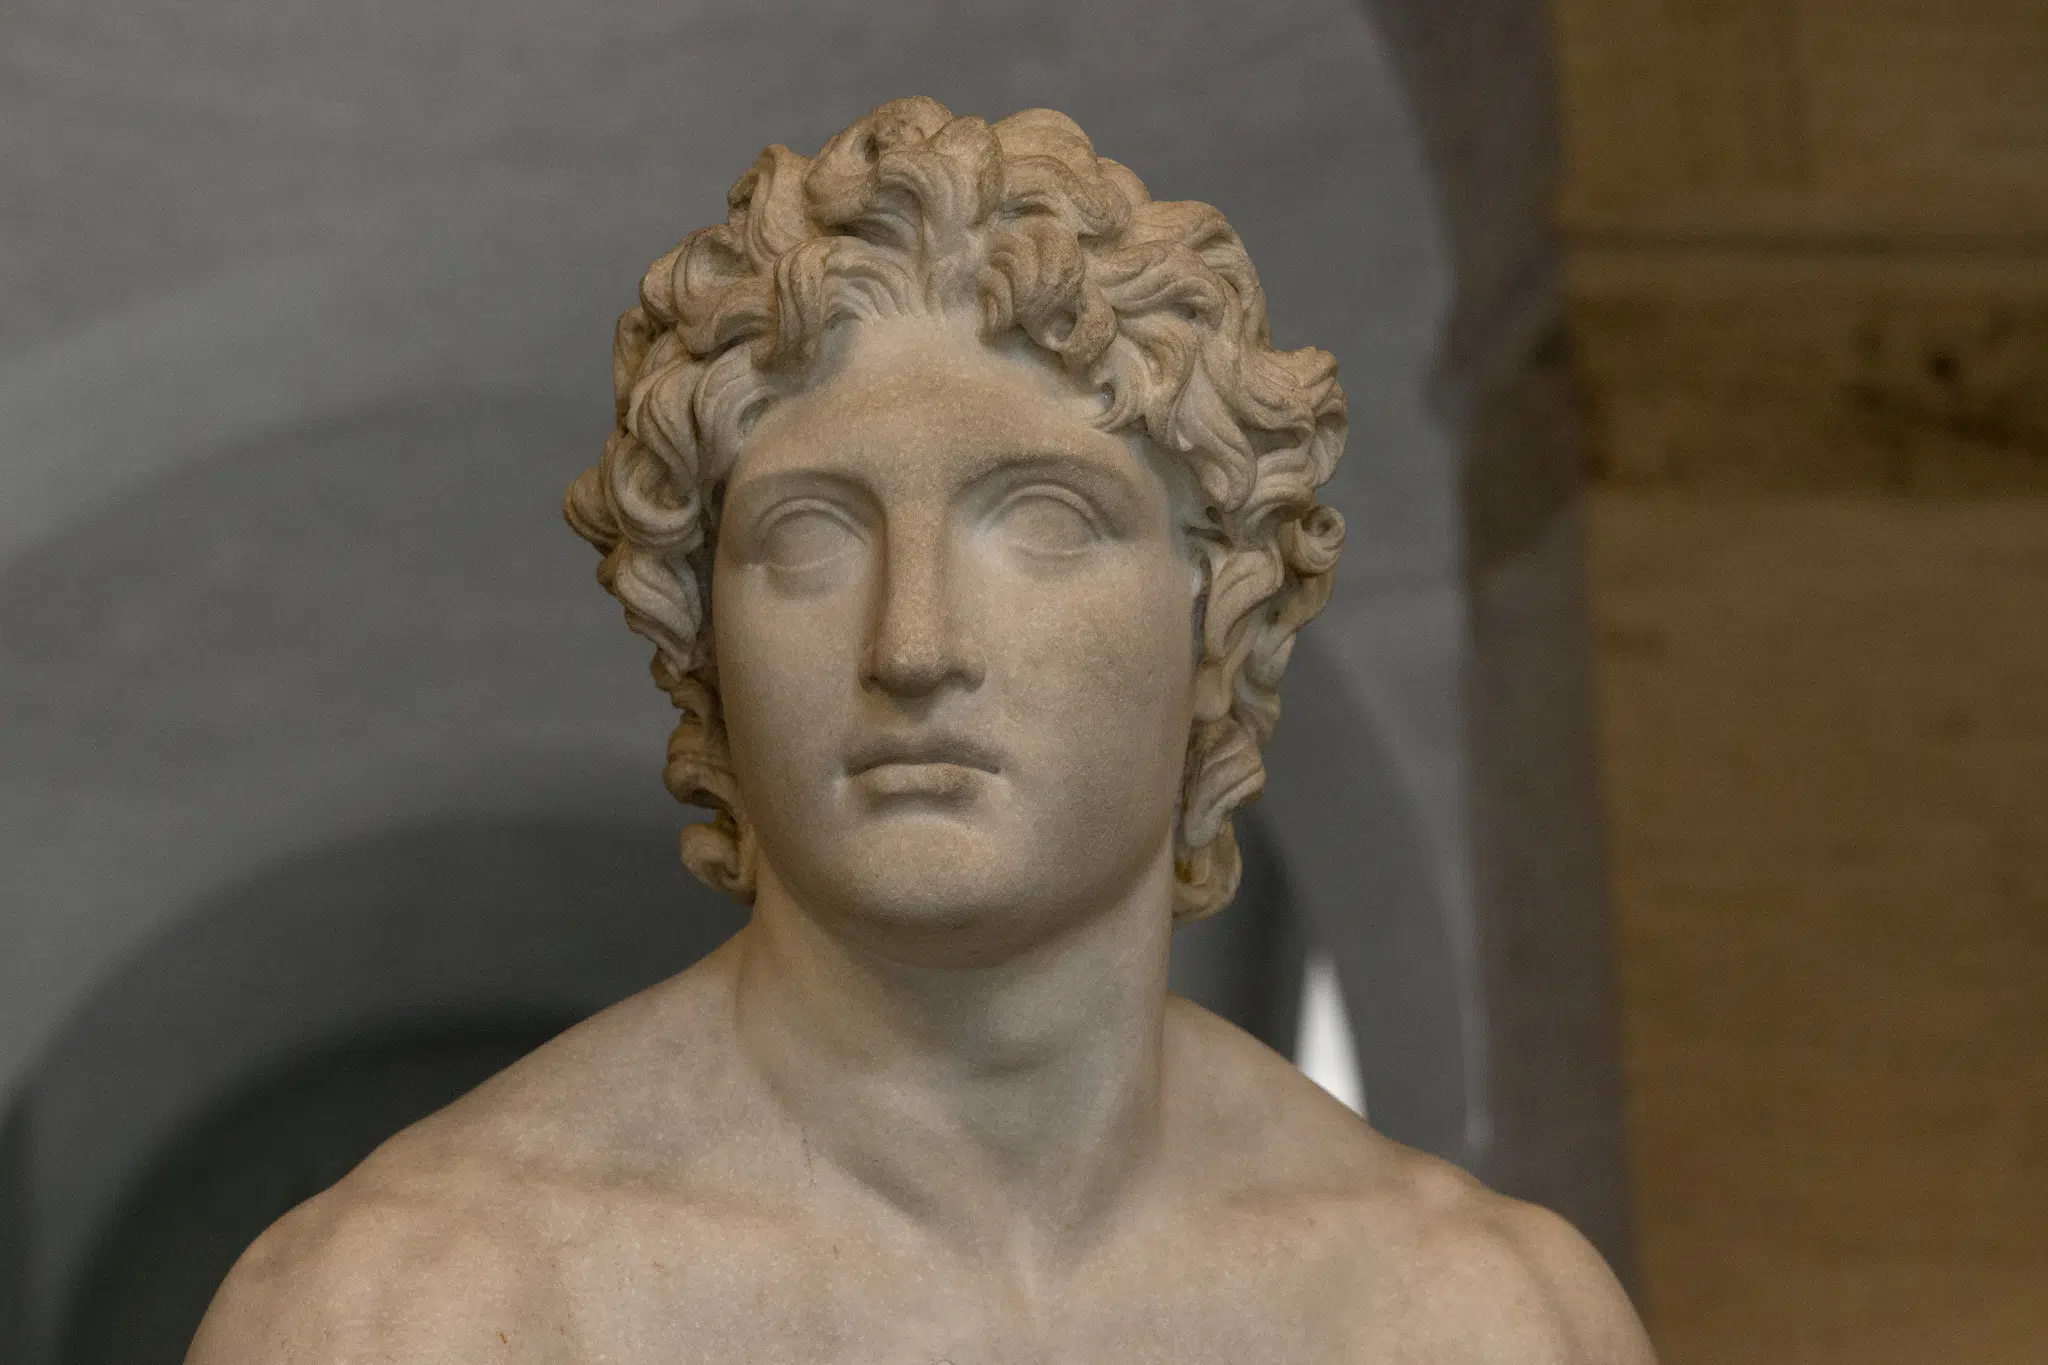 Greek archaeologist says she had no input to Netflic docu-drama about Alexander the Great. 